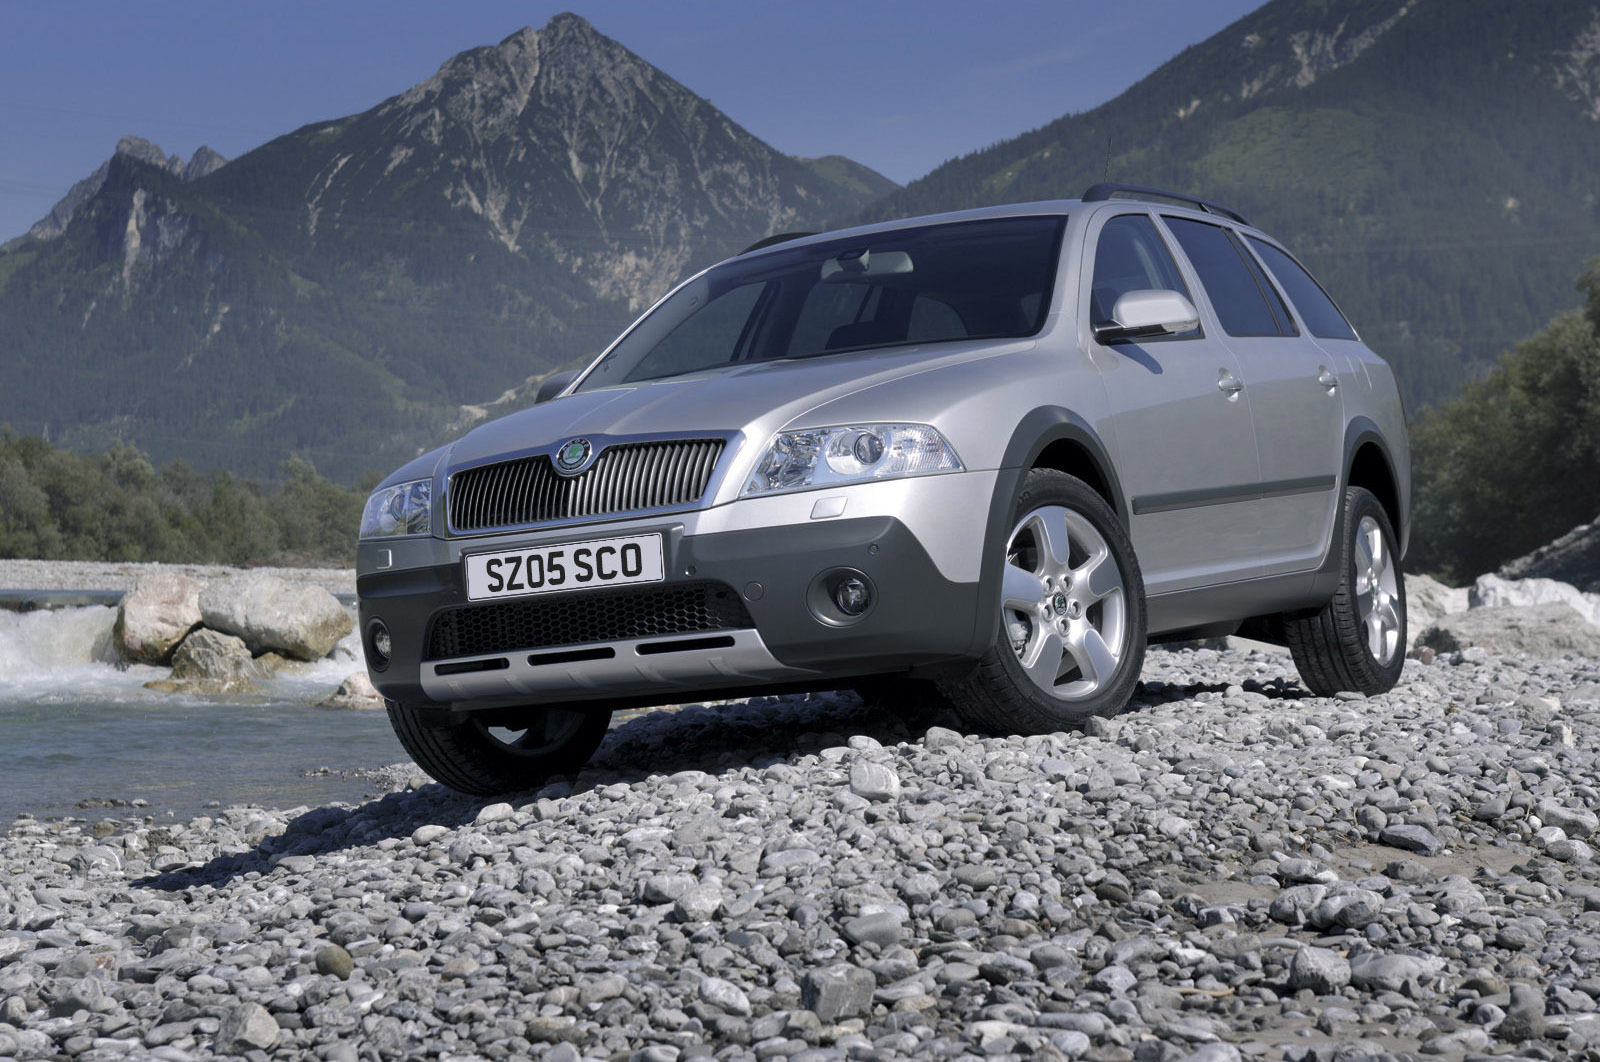 508 rxh, a6 allroad, audi, buying guide, estate cars, four-wheel drive, octavia scout, outback, peugeot, skoda, subaru, used cars, volvo, xc70, buying guide: best used 4x4 estate cars for adventures off the beaten track